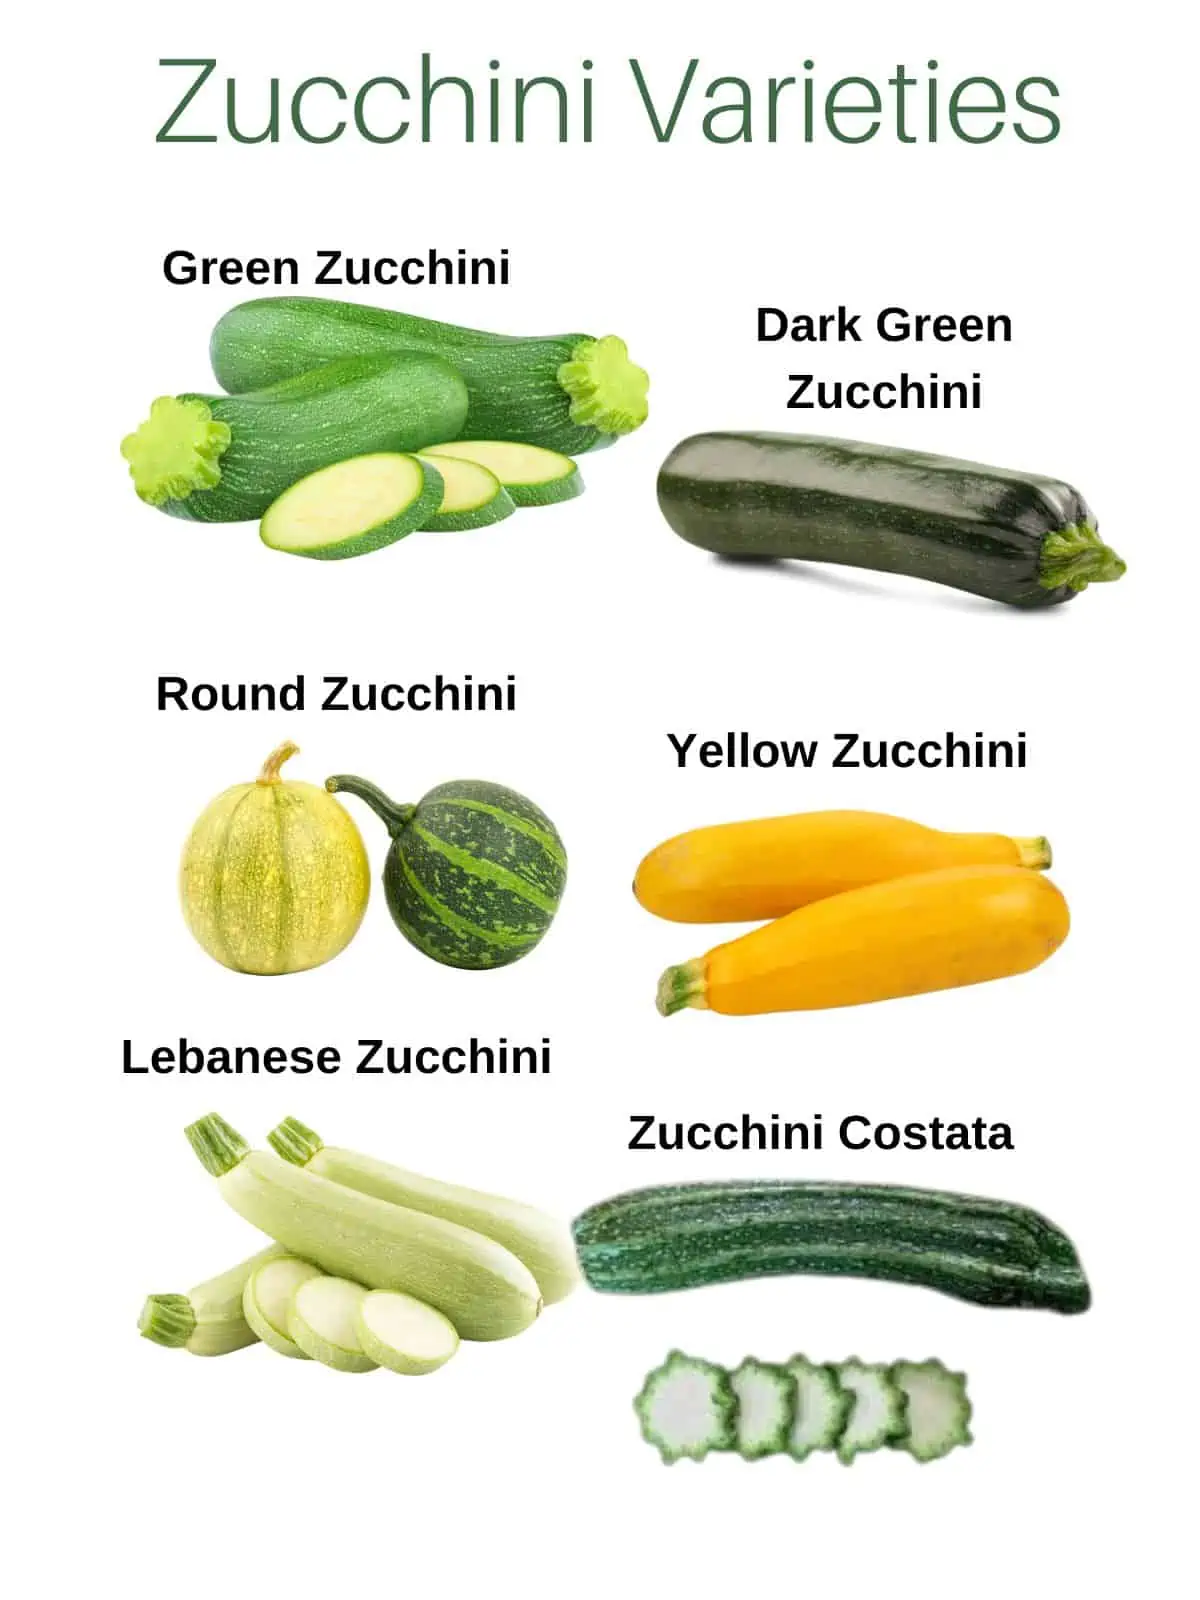 Labelled zucchini varieties.